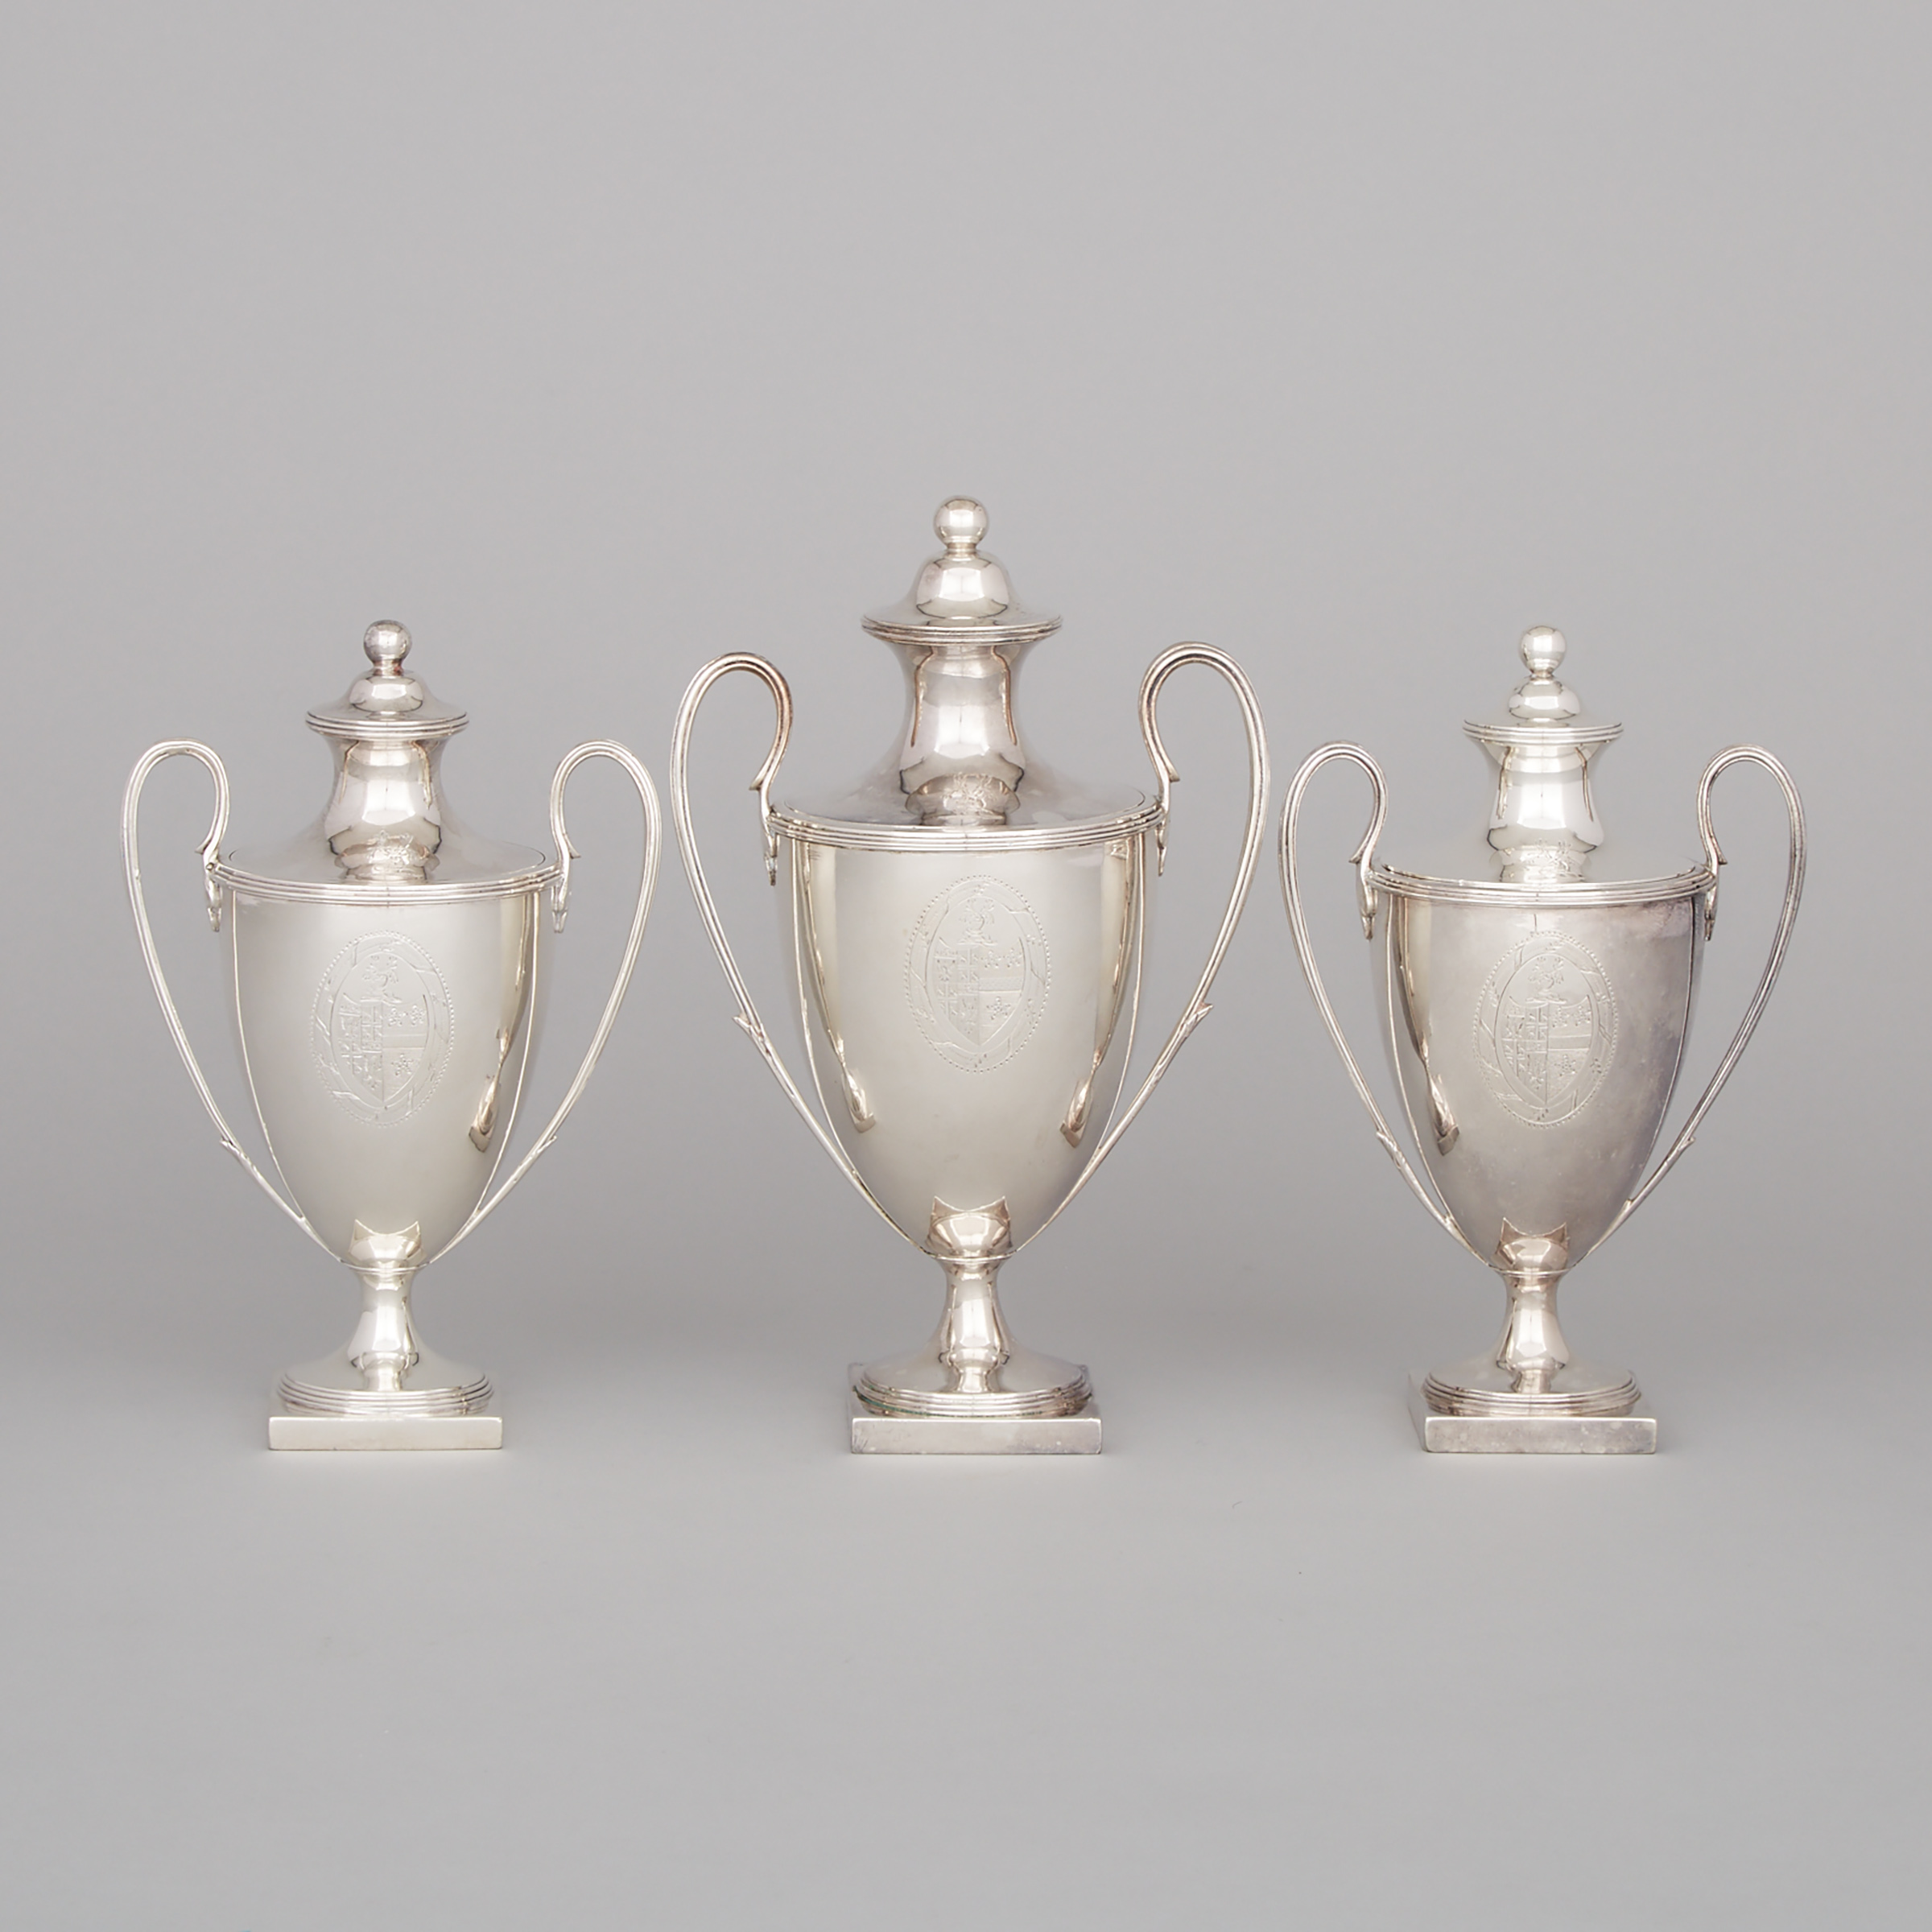 Set of Three George III Silver Sugar Vases and Covers, Robert Hennell I, London, 1785